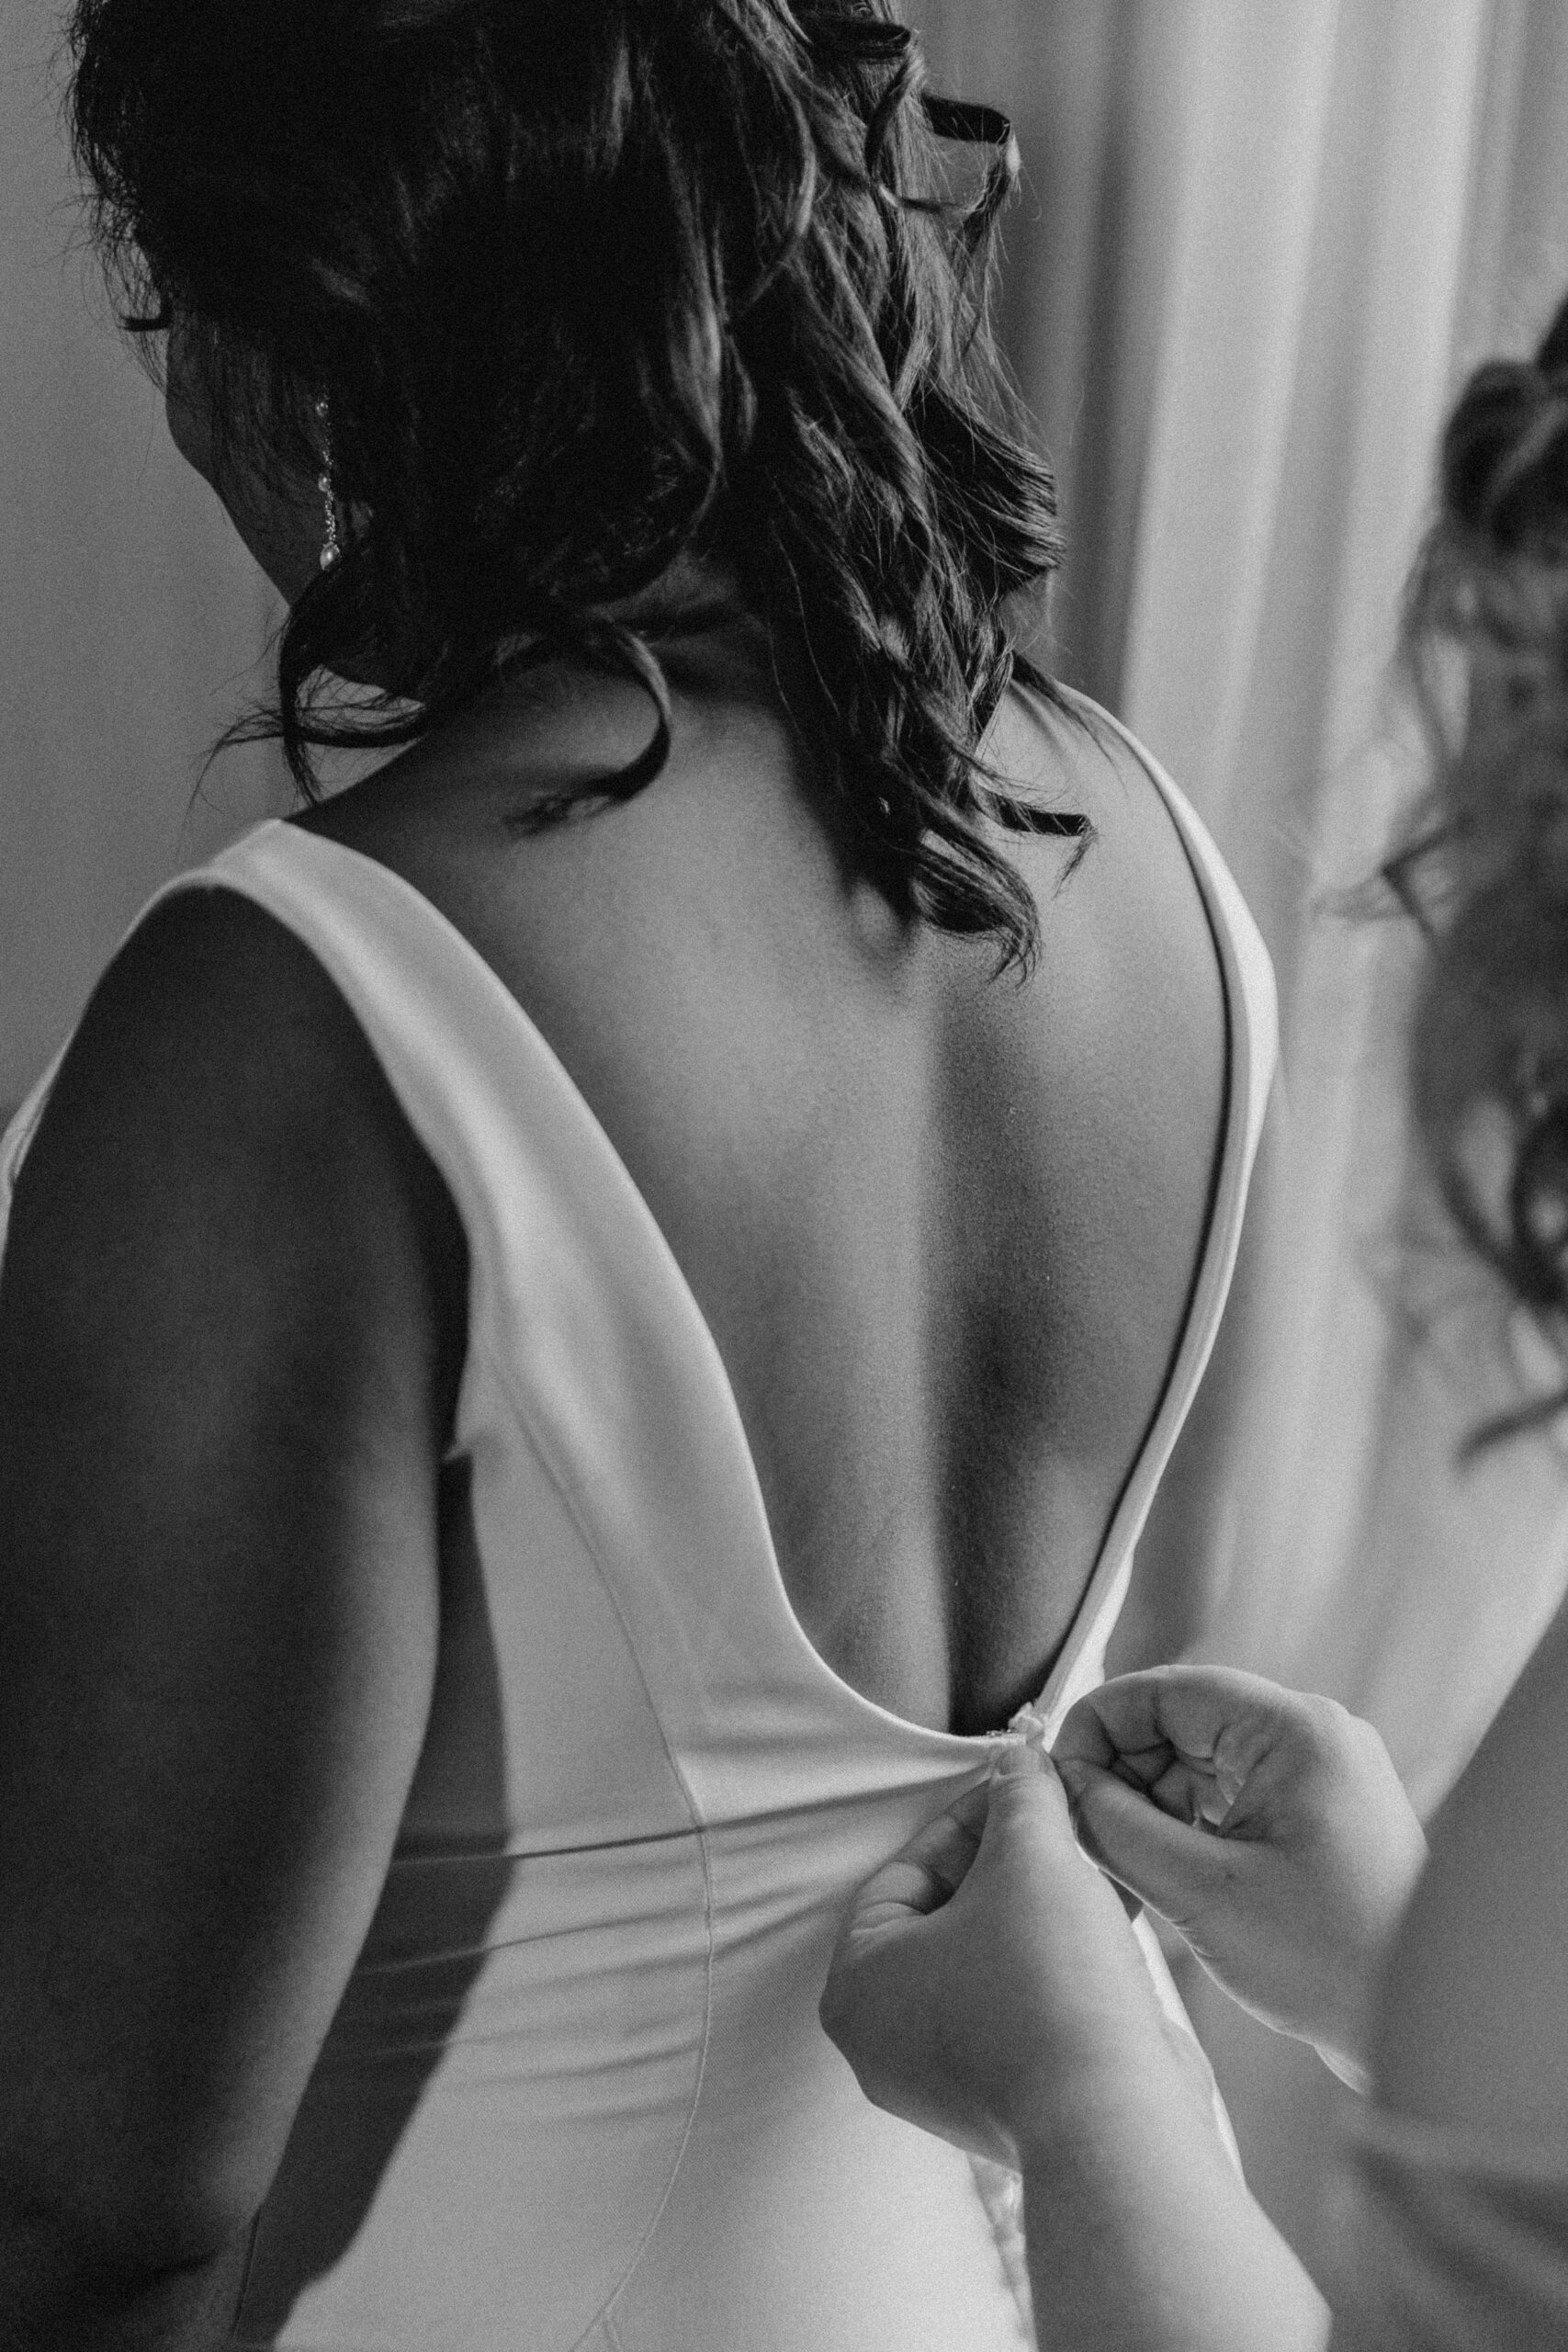 Bride getting ready to get Married on her Elopement Day in Italy